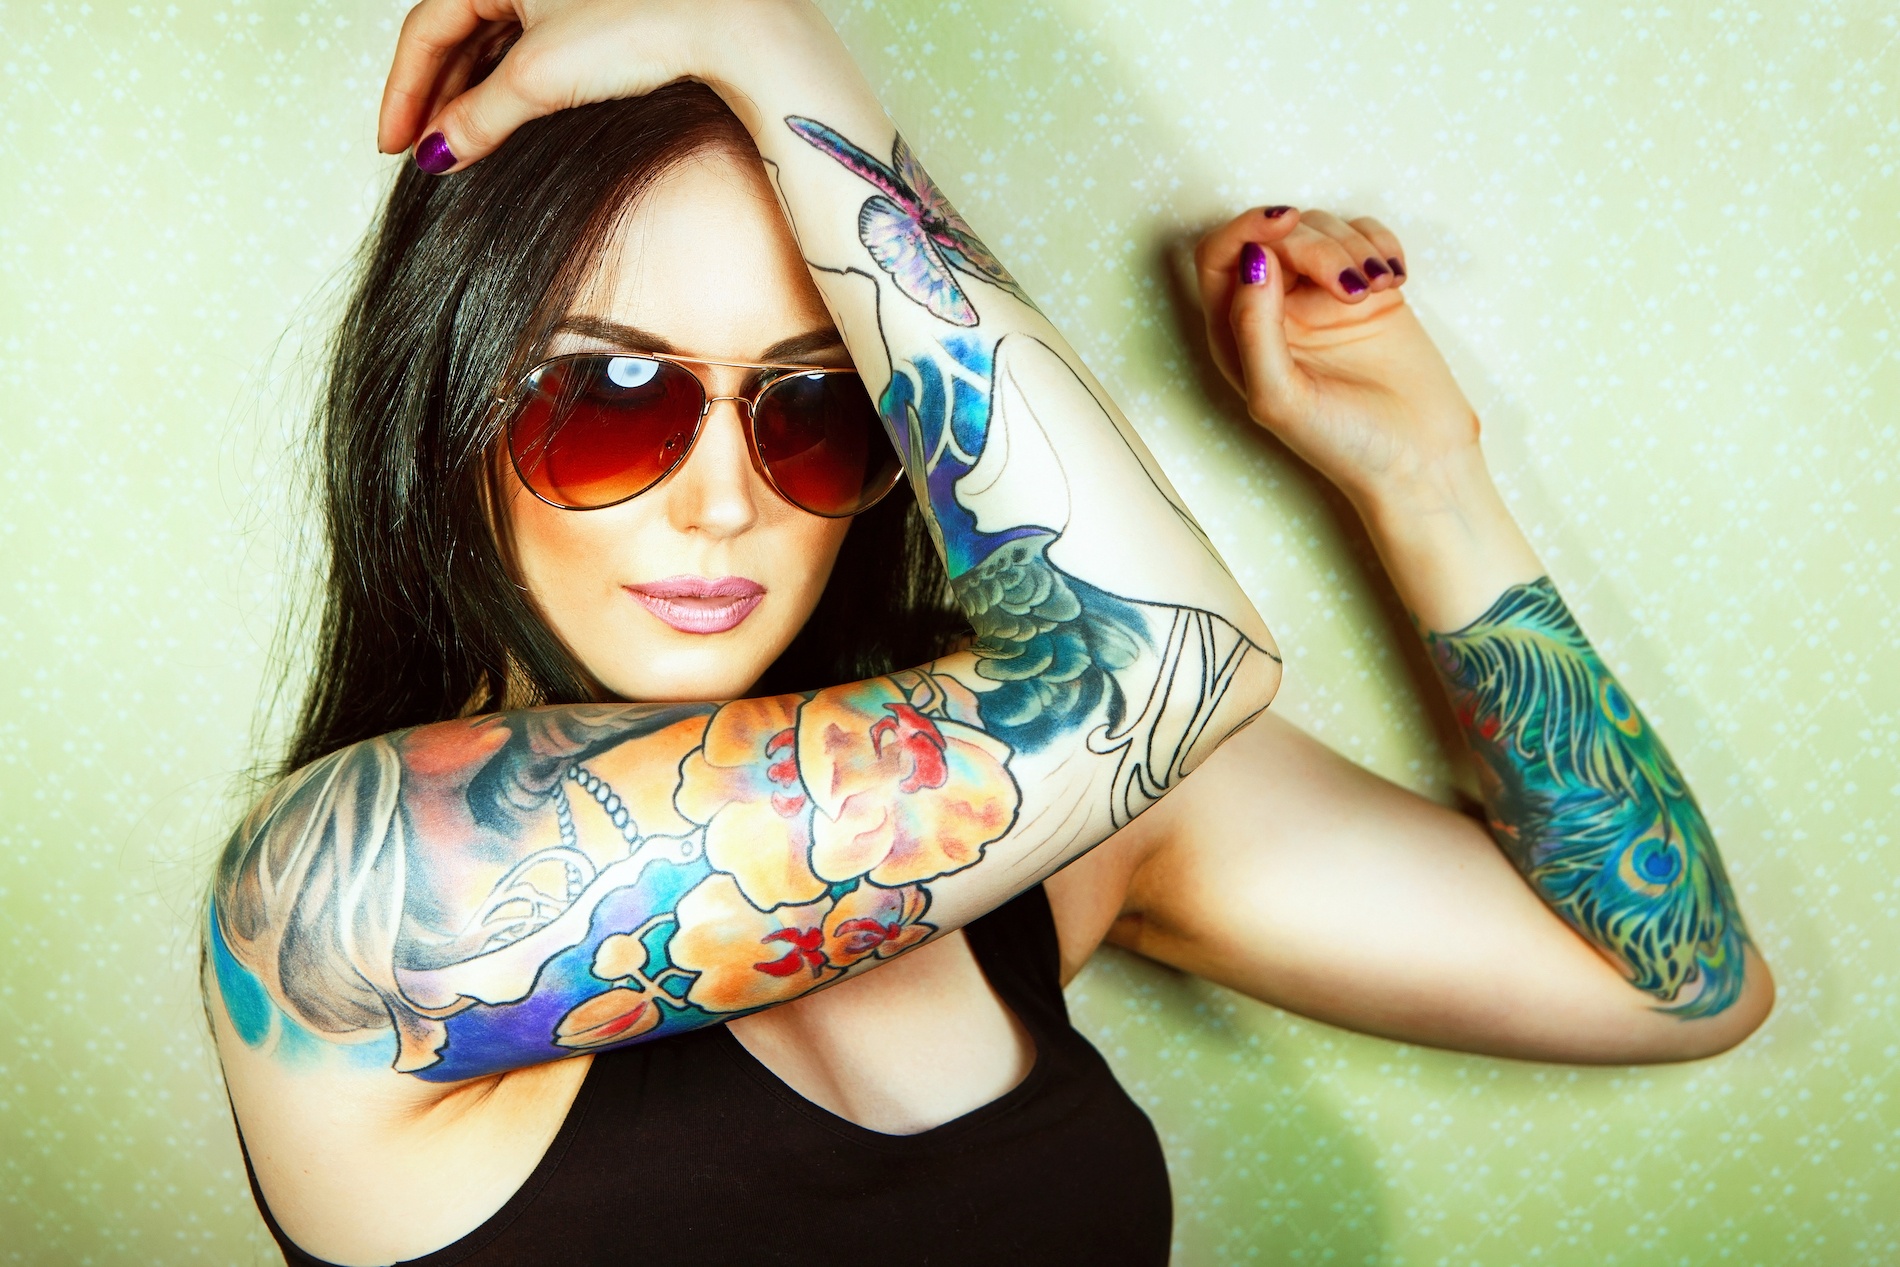 Meaningful Spiritual Tattoo Ideas to Inspire Your Journey